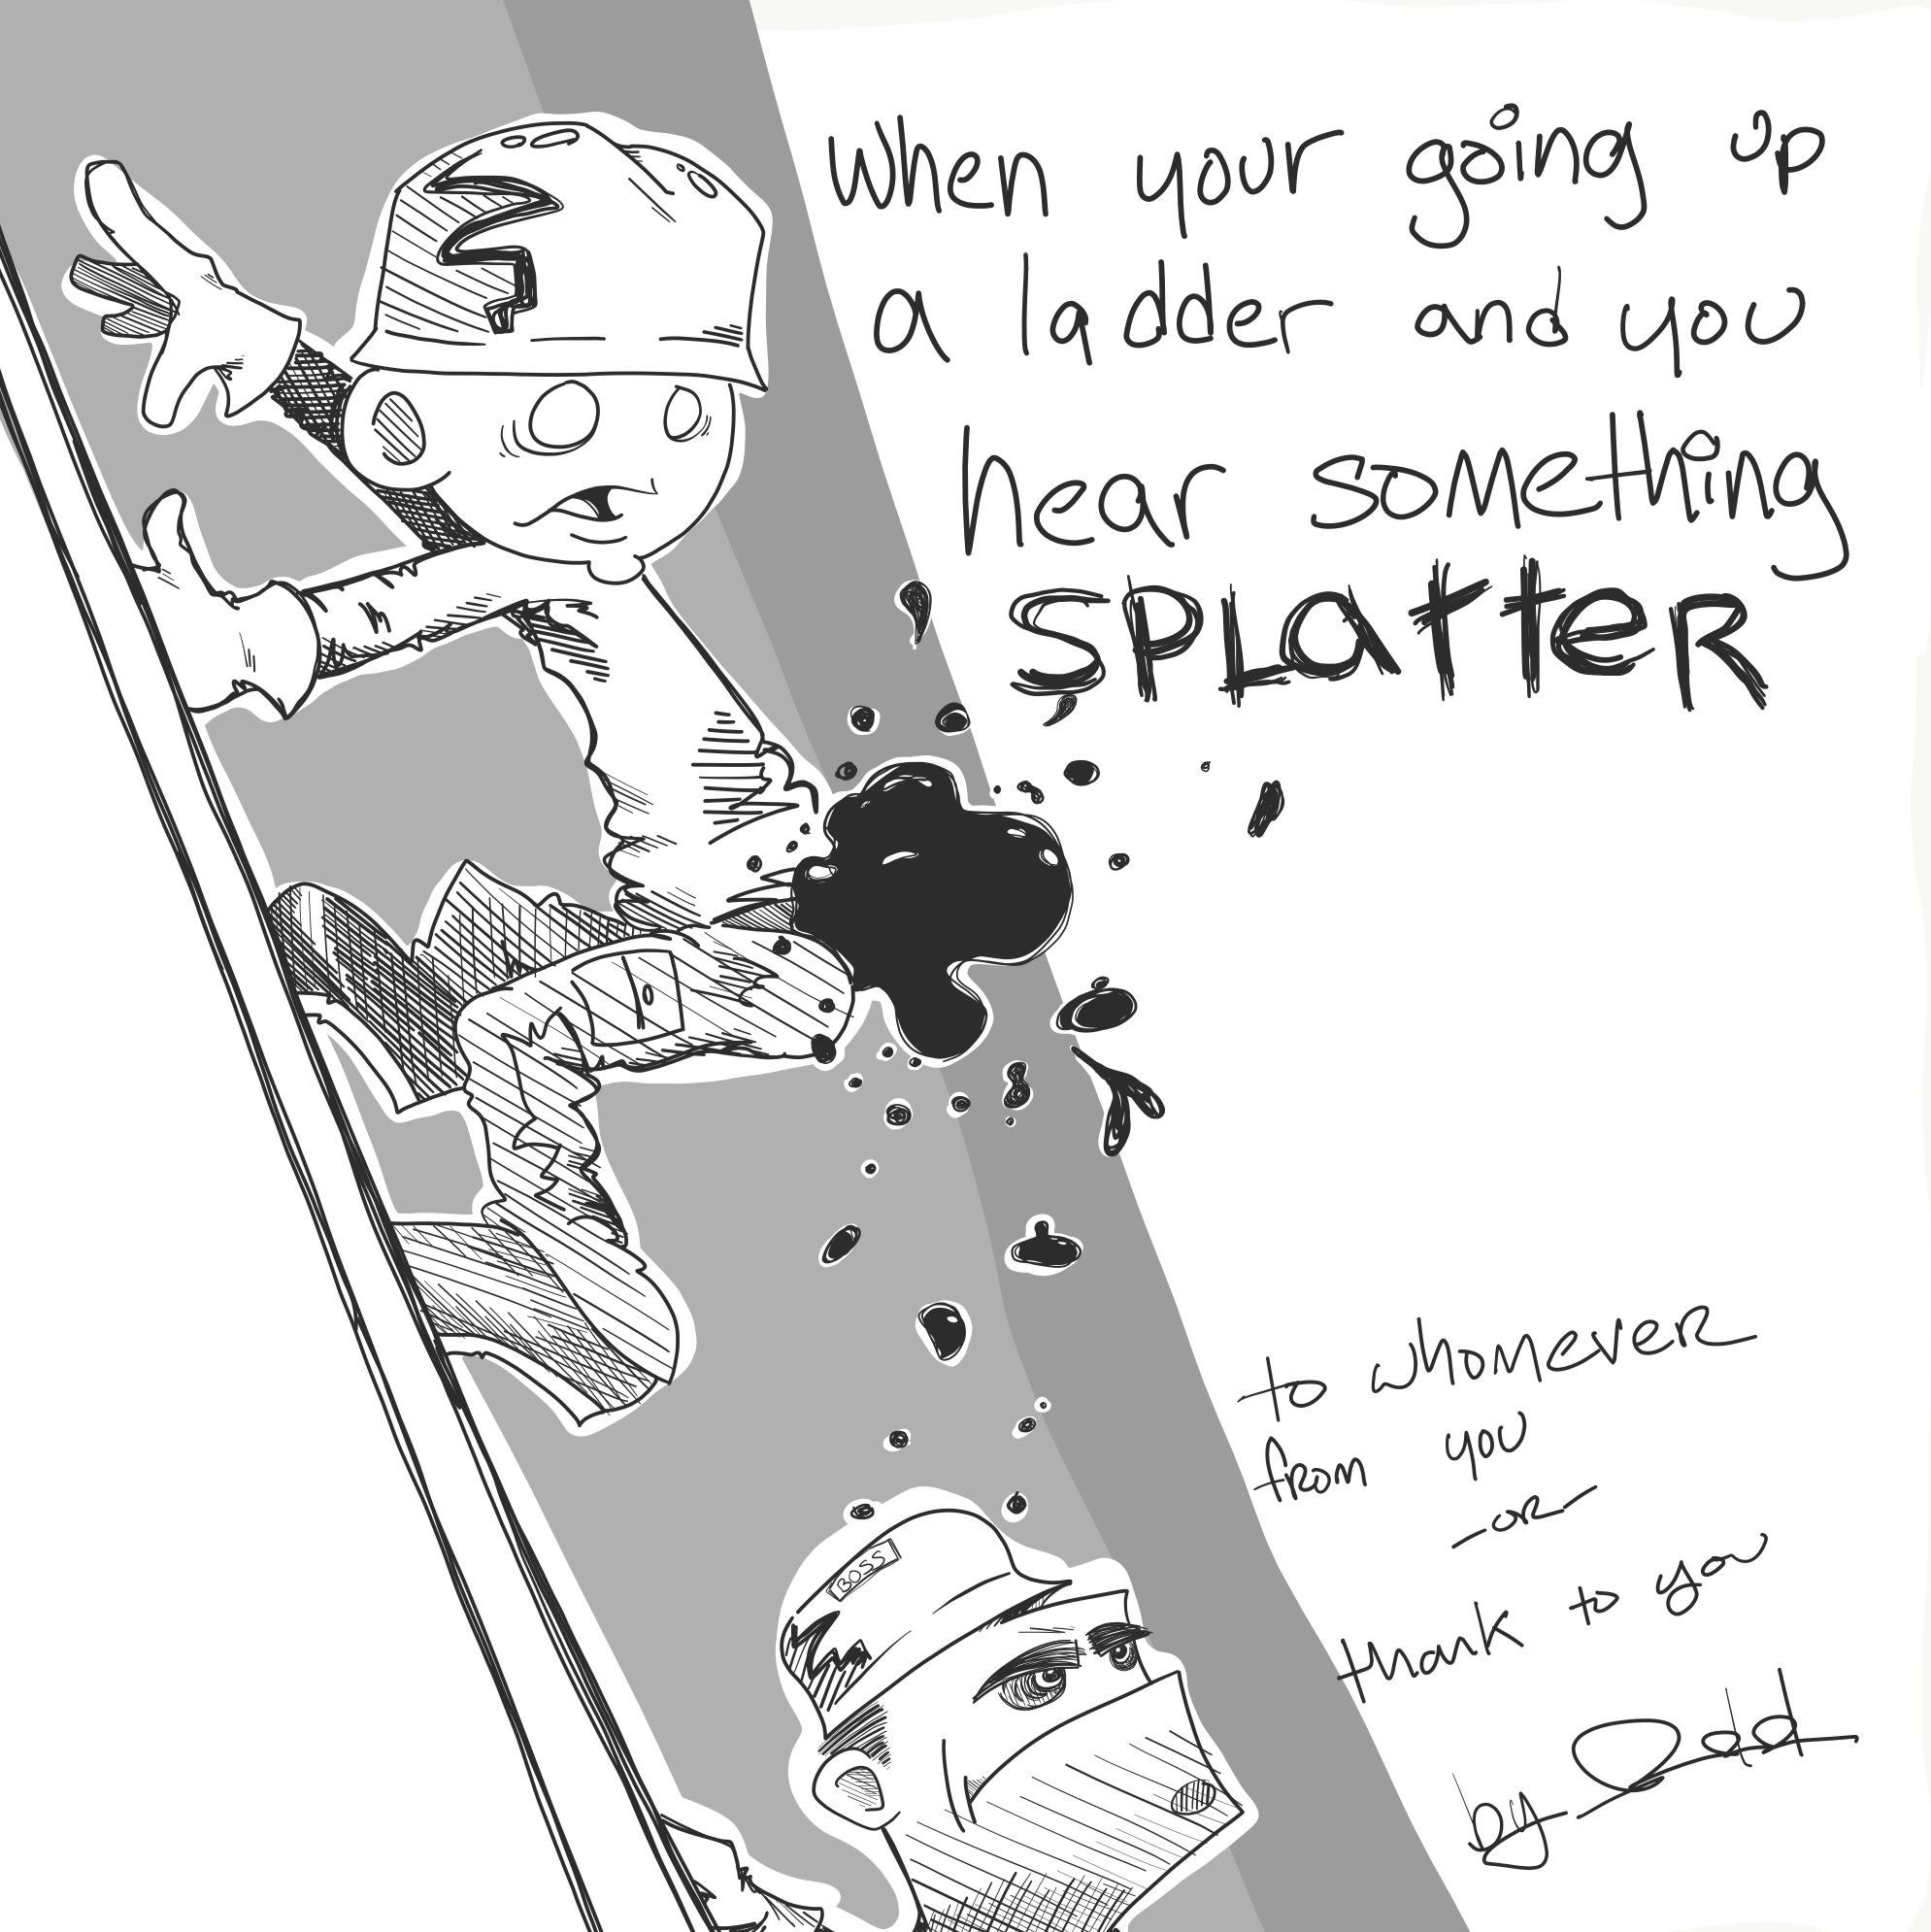 Draw A Scene From The Diarrhea Song By Odddodger